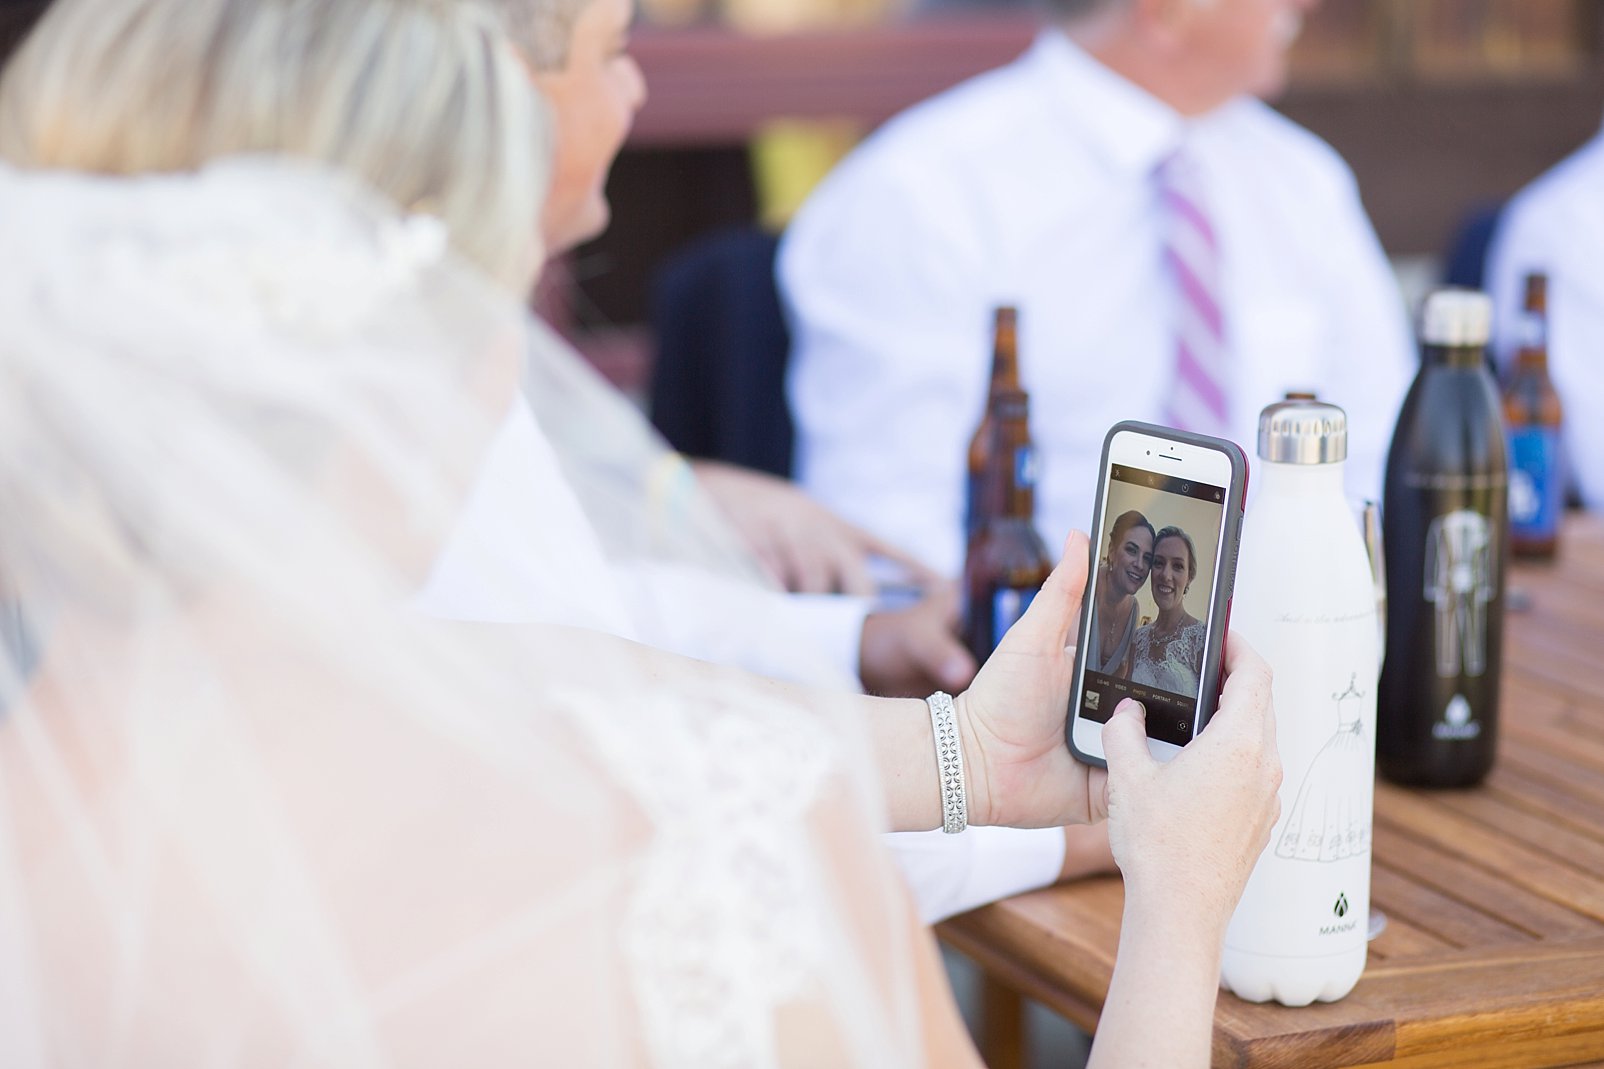 taking a selfie at a wedding with the bride